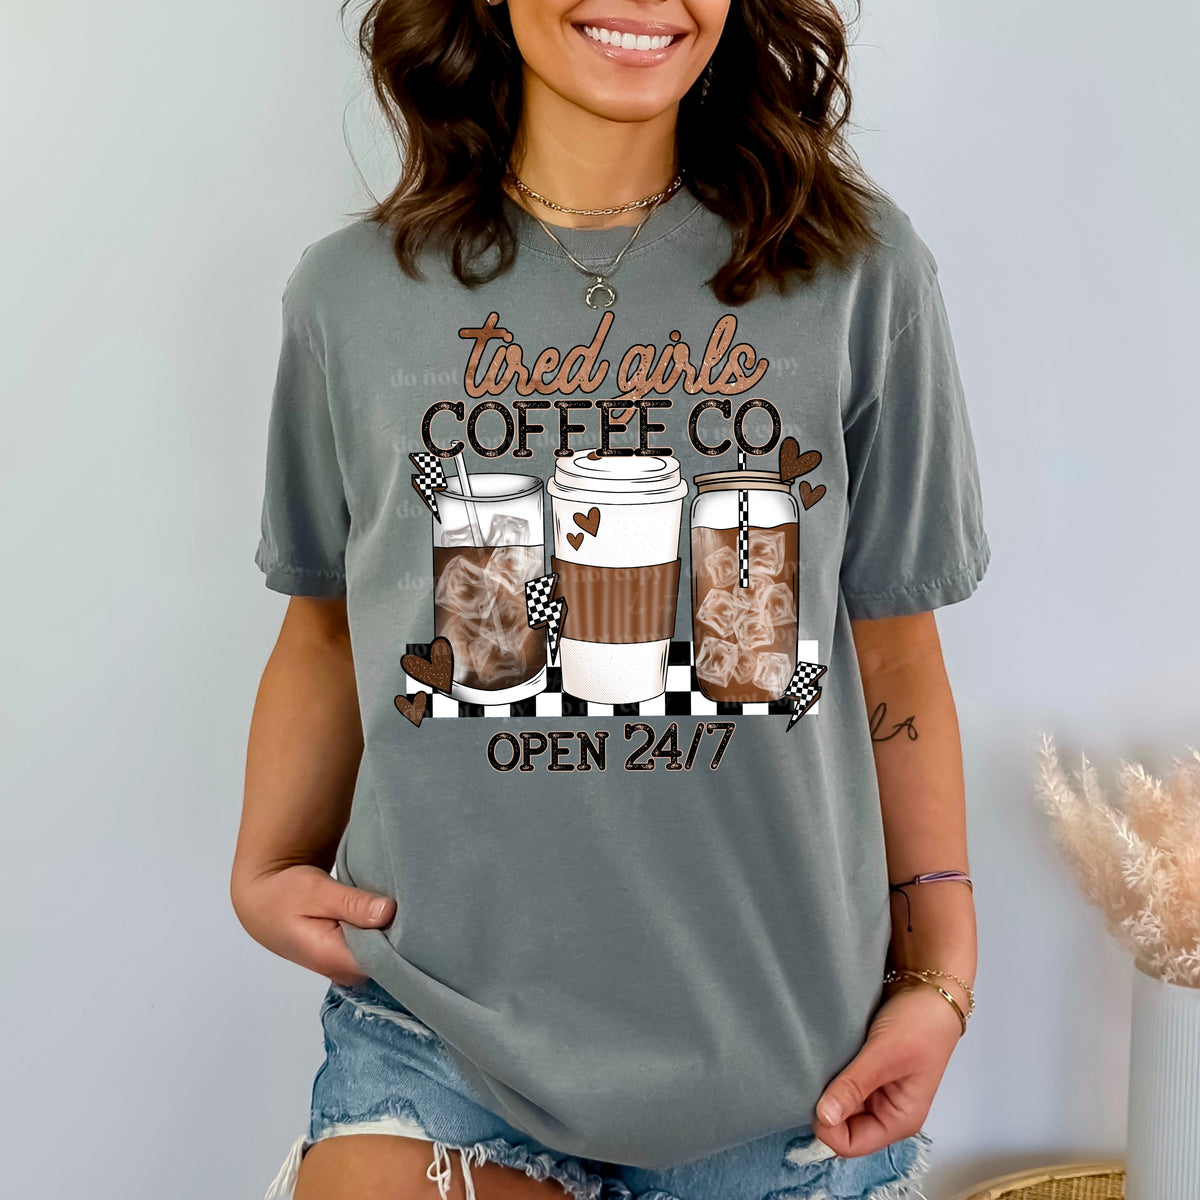 Tired girls coffee co PNG